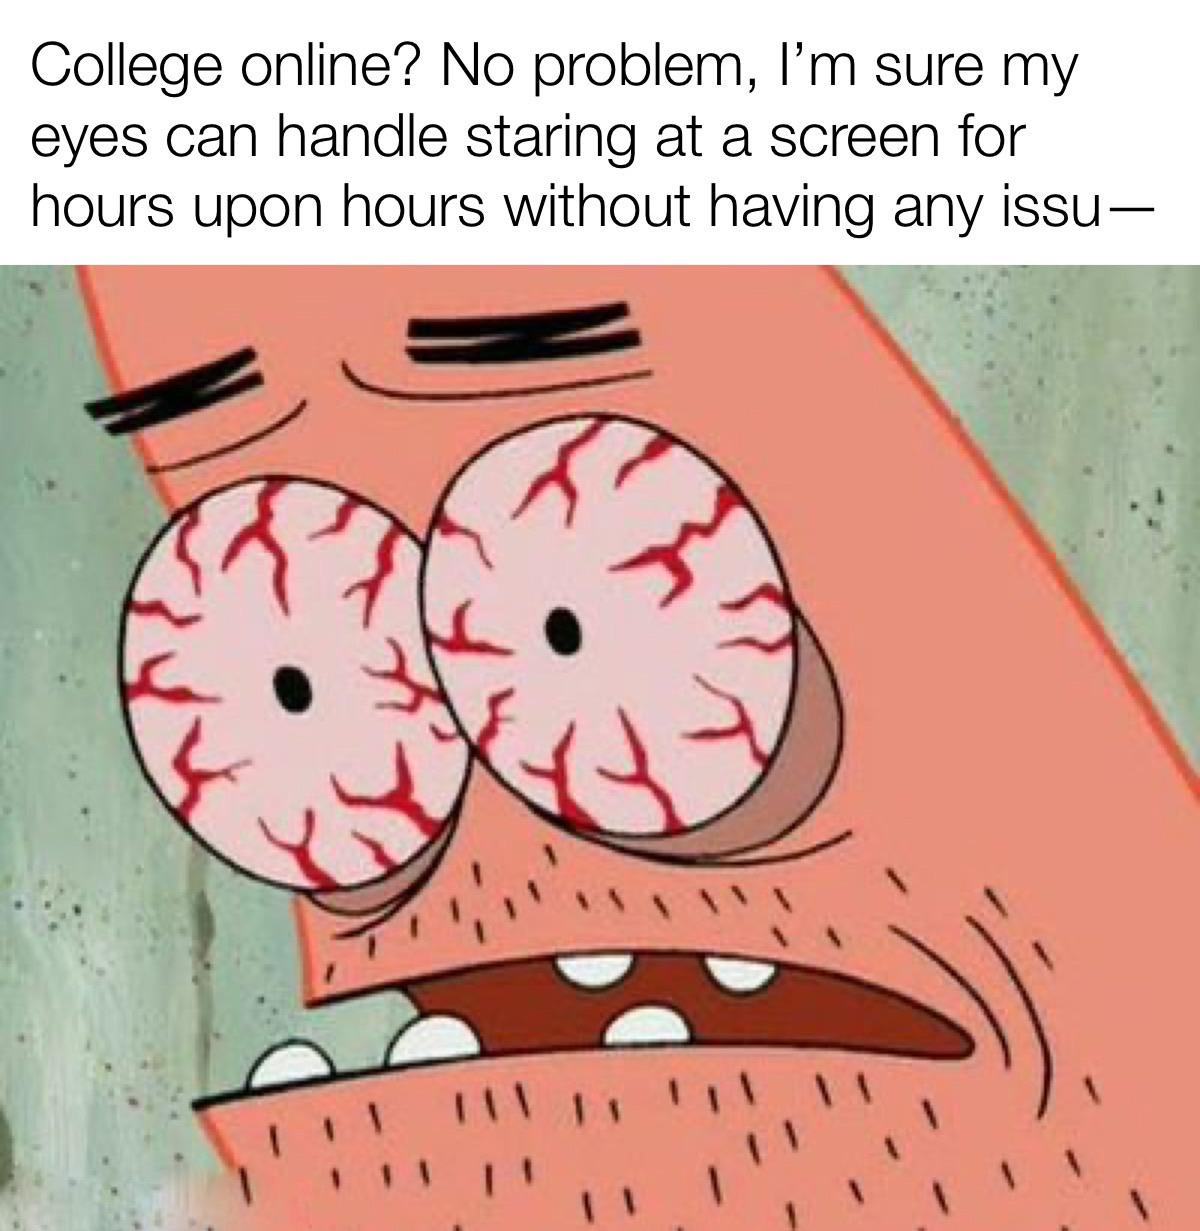 r/collegememes- college dank memes - bloodshot eyes gif - College online? No problem, I'm sure my eyes can handle staring at a screen for hours upon hours without having any issu